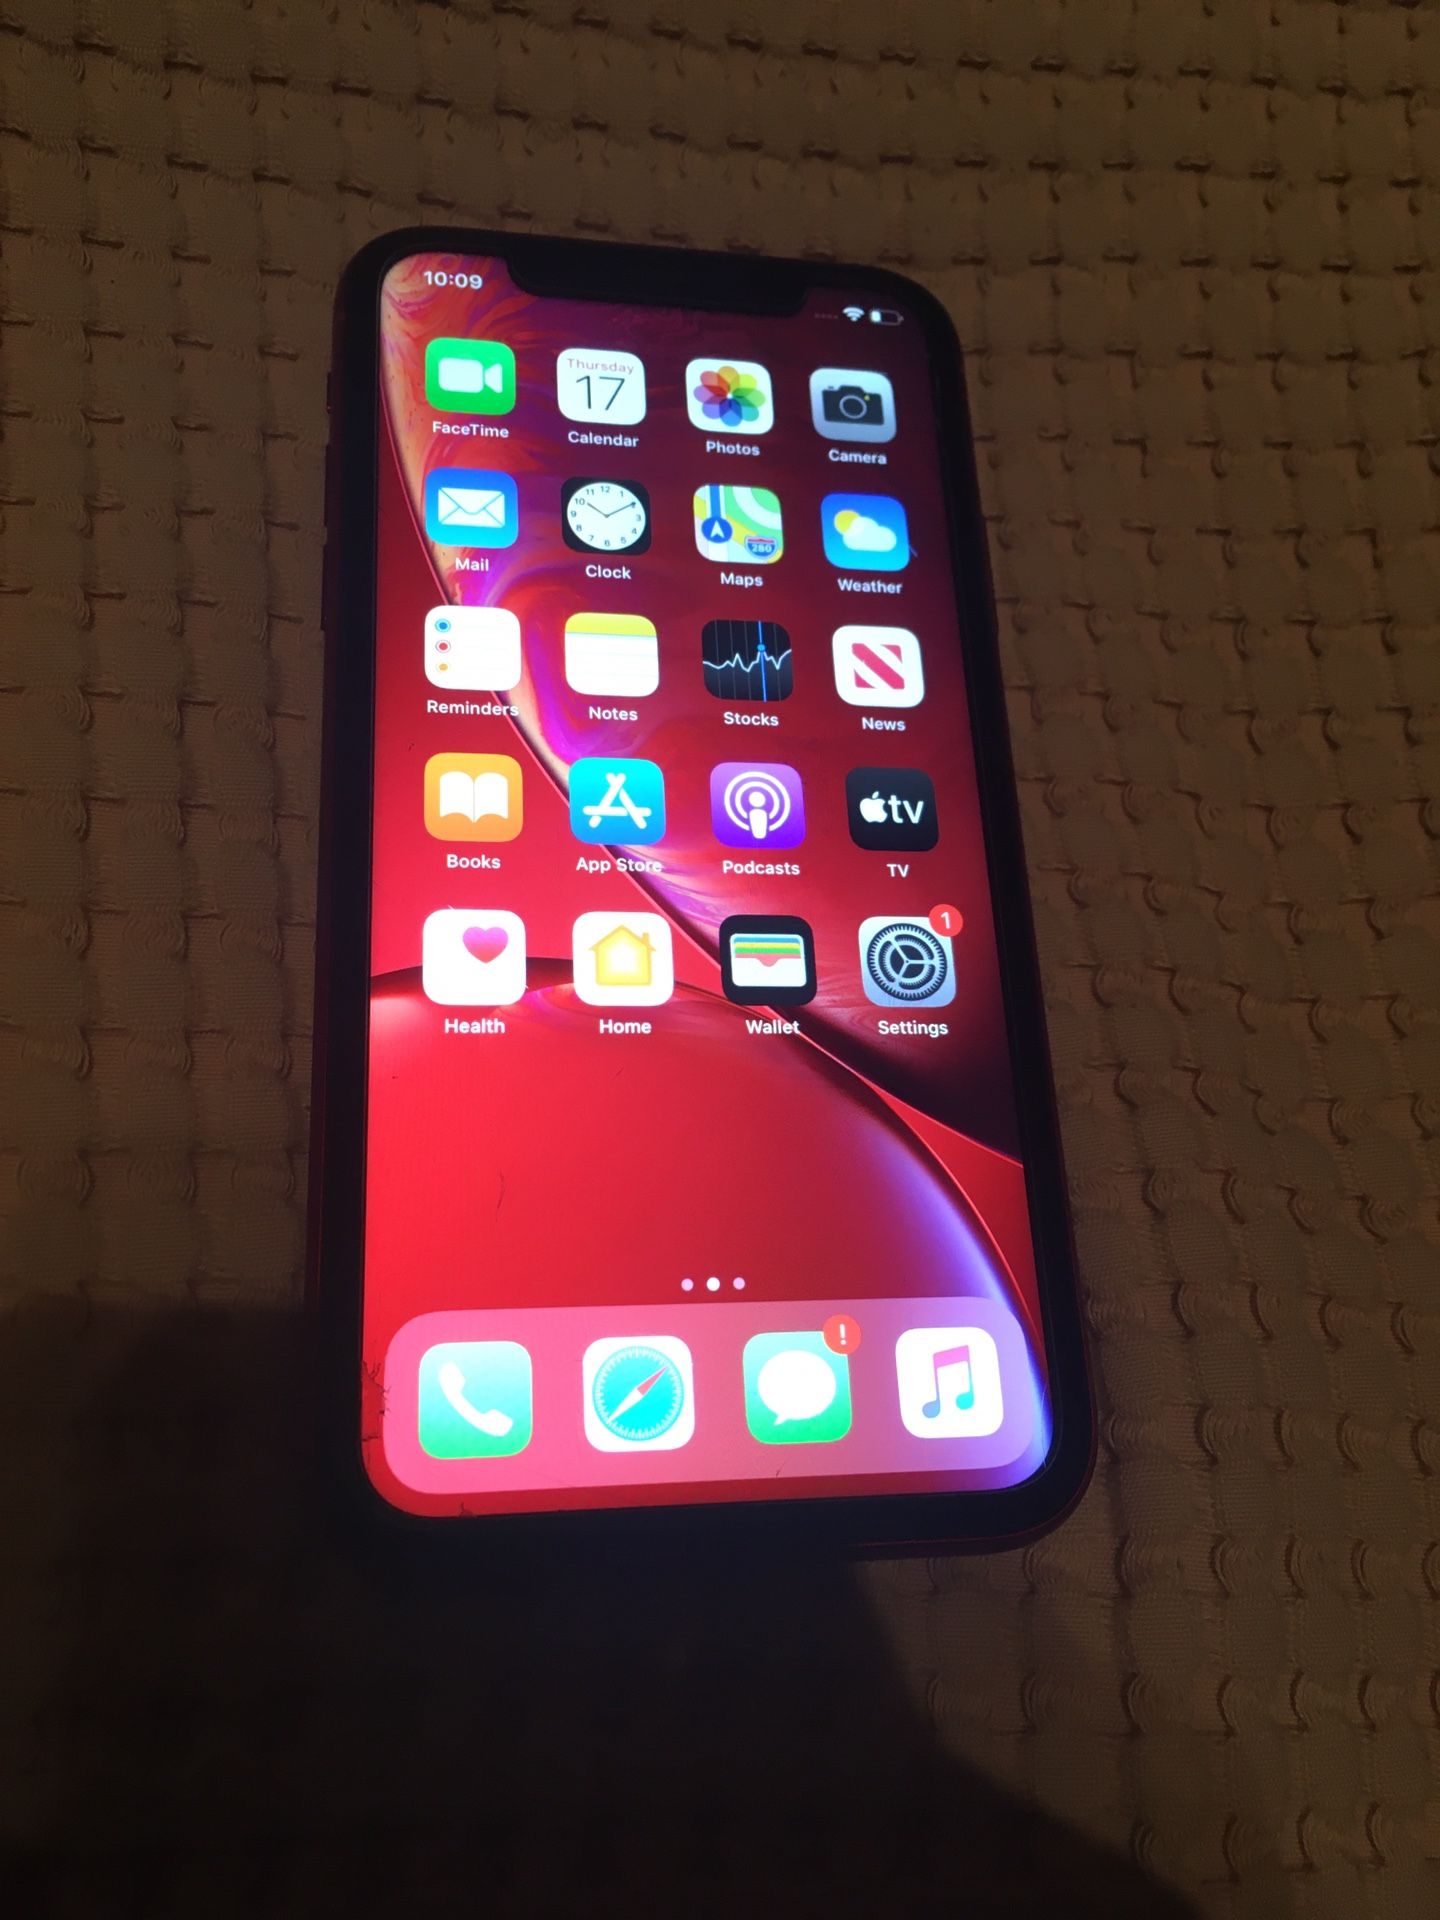 Fully unlocked iPhone xr. 128gb. Product red. iCloud unlocked